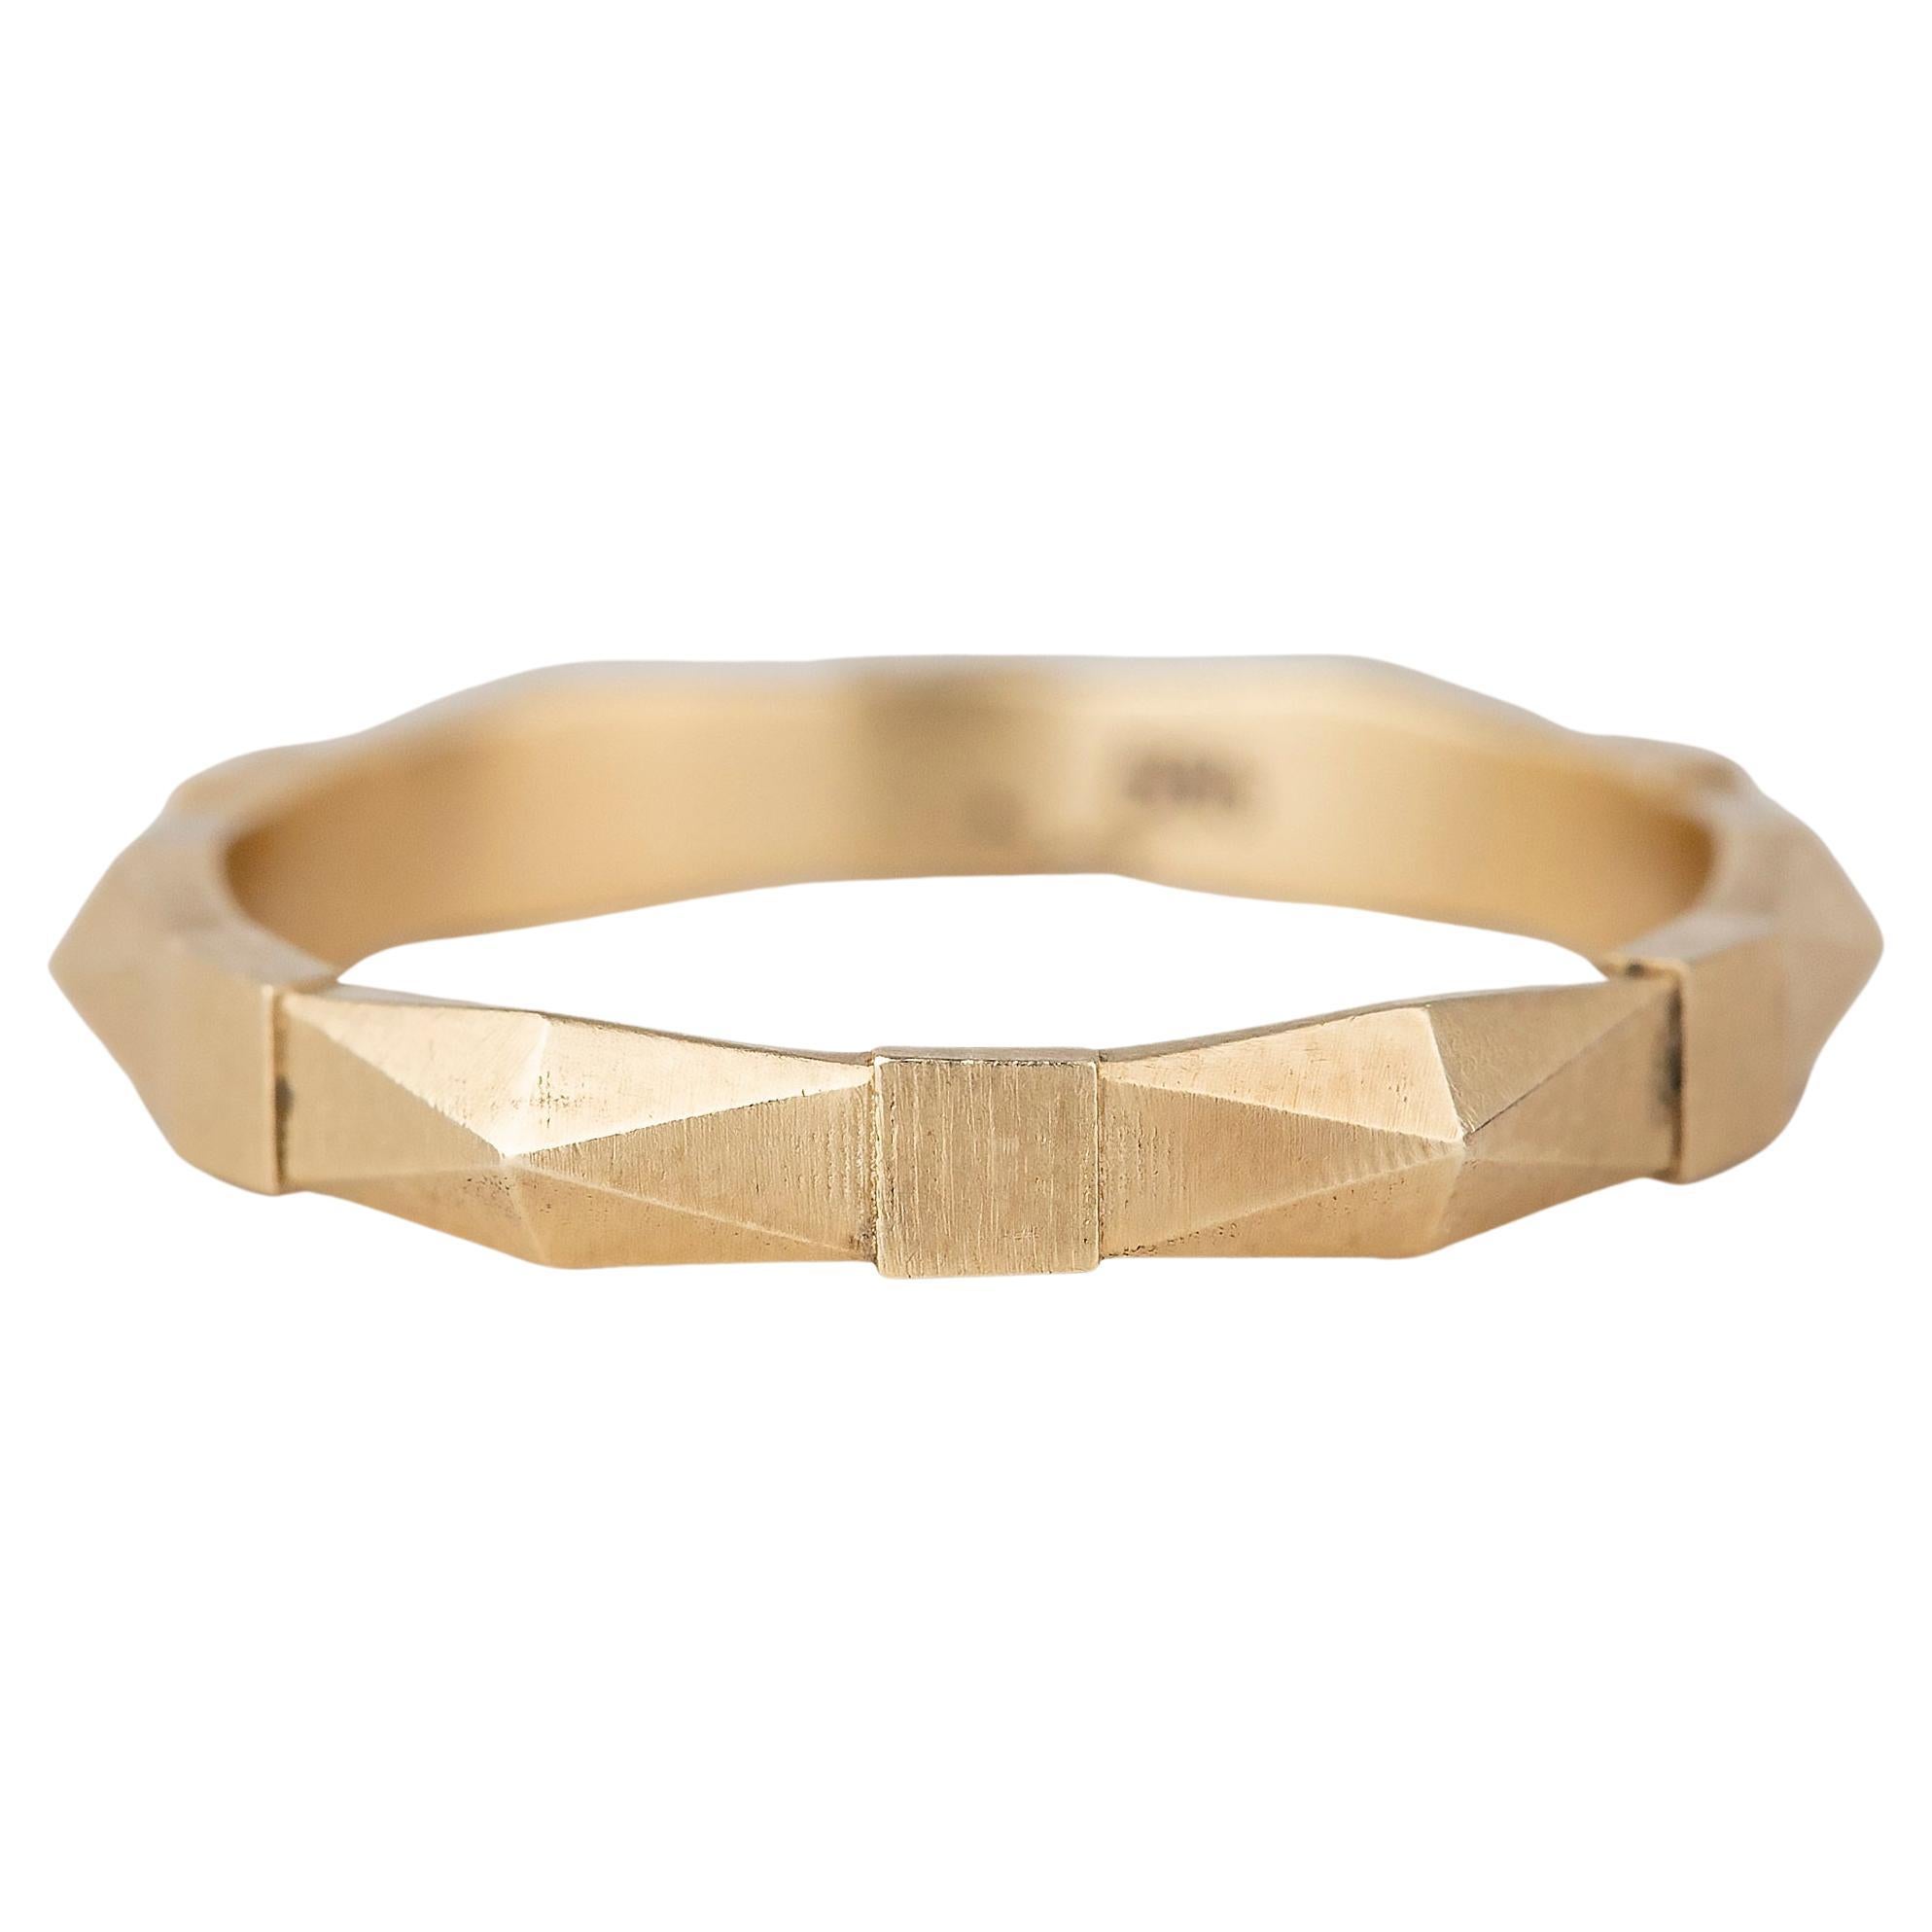 Vintage Style 14K Gold Geometrical Wedding Band for Men and Women